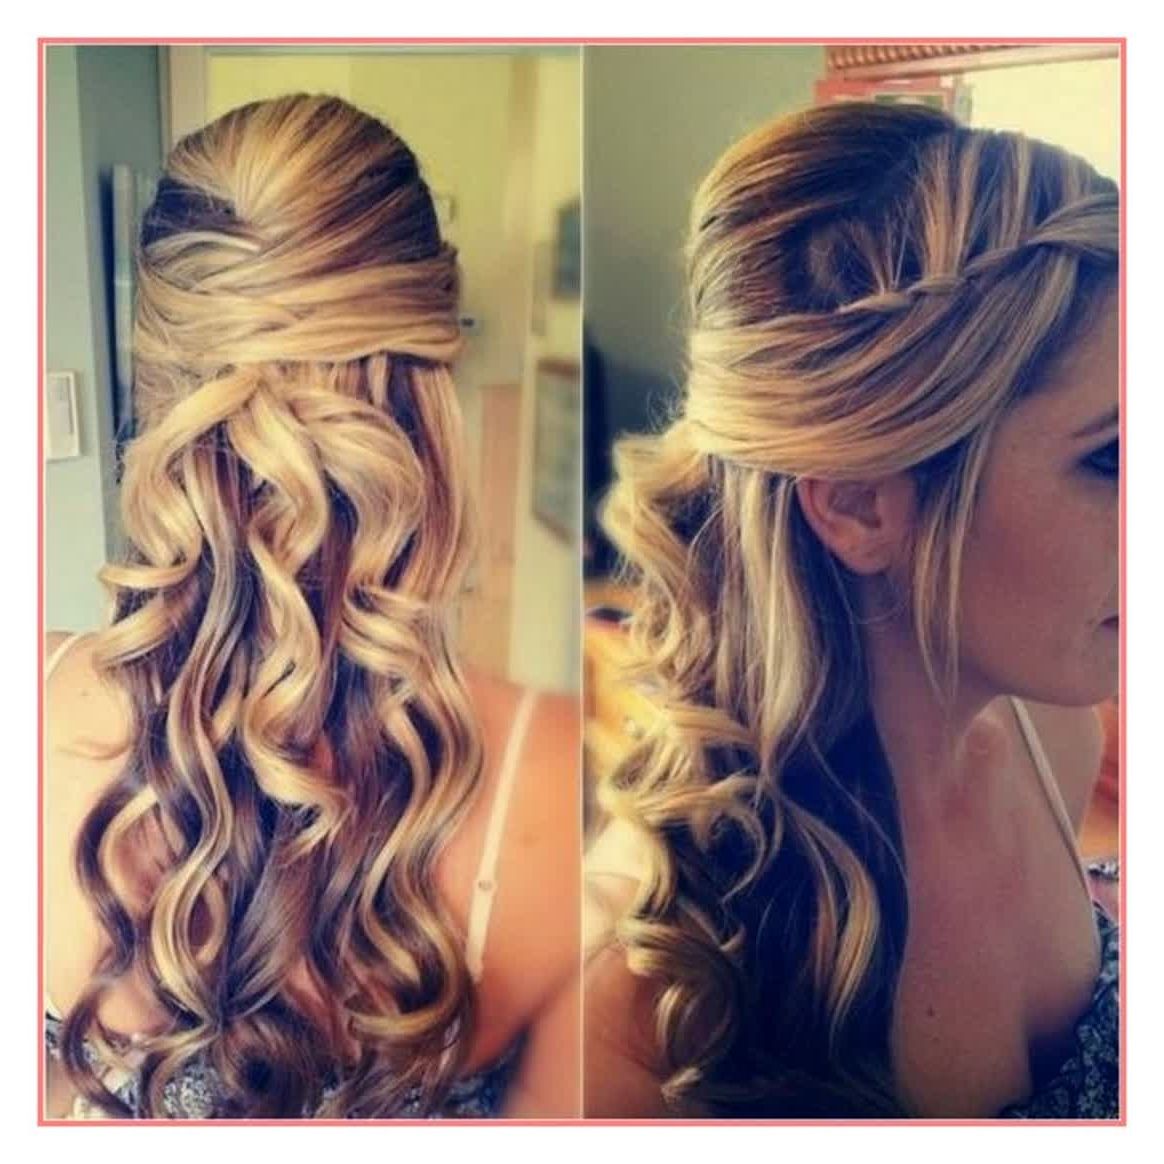 Beautiful Hairstyles Country Wedding Bridesmaid Hair – Best Throughout Well Liked Country Wedding Hairstyles For Bridesmaids (View 5 of 15)